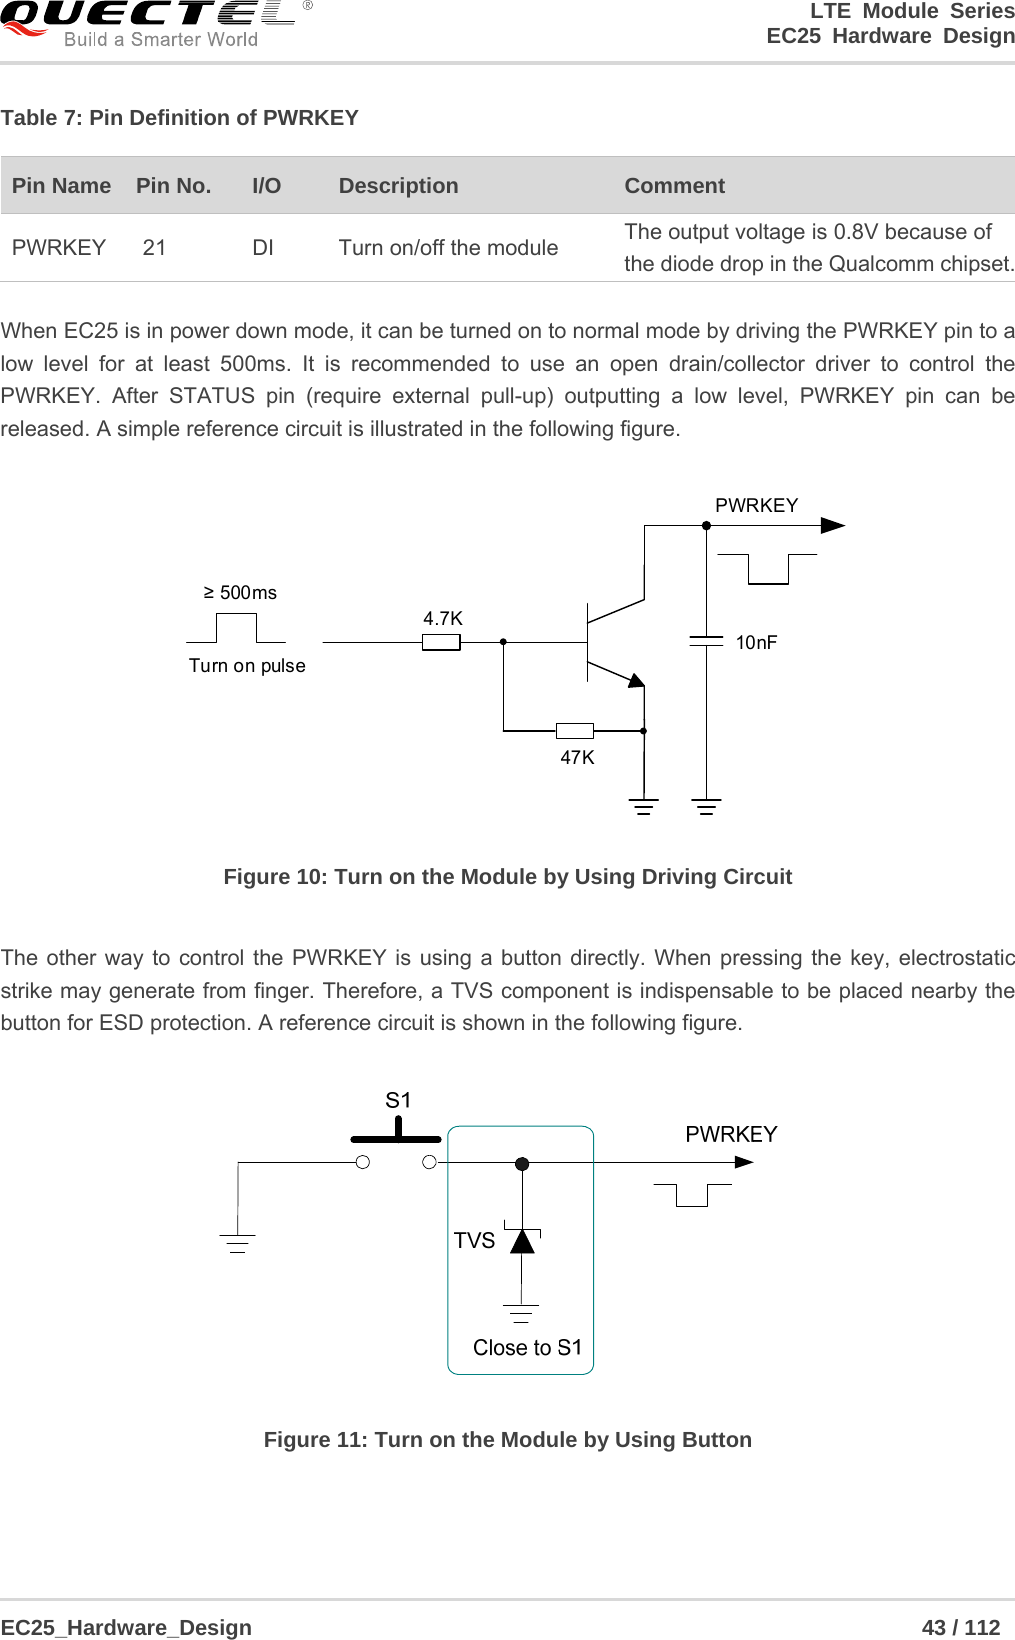 LTE Module Series                                                  EC25 Hardware Design  EC25_Hardware_Design                                                             43 / 112    Table 7: Pin Definition of PWRKEY  When EC25 is in power down mode, it can be turned on to normal mode by driving the PWRKEY pin to a low level for at least 500ms. It is recommended to use an open drain/collector driver to control the PWRKEY. After STATUS pin (require external pull-up) outputting a low level, PWRKEY pin can be released. A simple reference circuit is illustrated in the following figure. Turn on pulsePWRKEY4.7K47K≥ 500ms10nF Figure 10: Turn on the Module by Using Driving Circuit  The other way to control the PWRKEY is using a button directly. When pressing the key, electrostatic strike may generate from finger. Therefore, a TVS component is indispensable to be placed nearby the button for ESD protection. A reference circuit is shown in the following figure.  Figure 11: Turn on the Module by Using Button   Pin Name    Pin No.  I/O  Description  Comment PWRKEY  21  DI  Turn on/off the module  The output voltage is 0.8V because of the diode drop in the Qualcomm chipset.